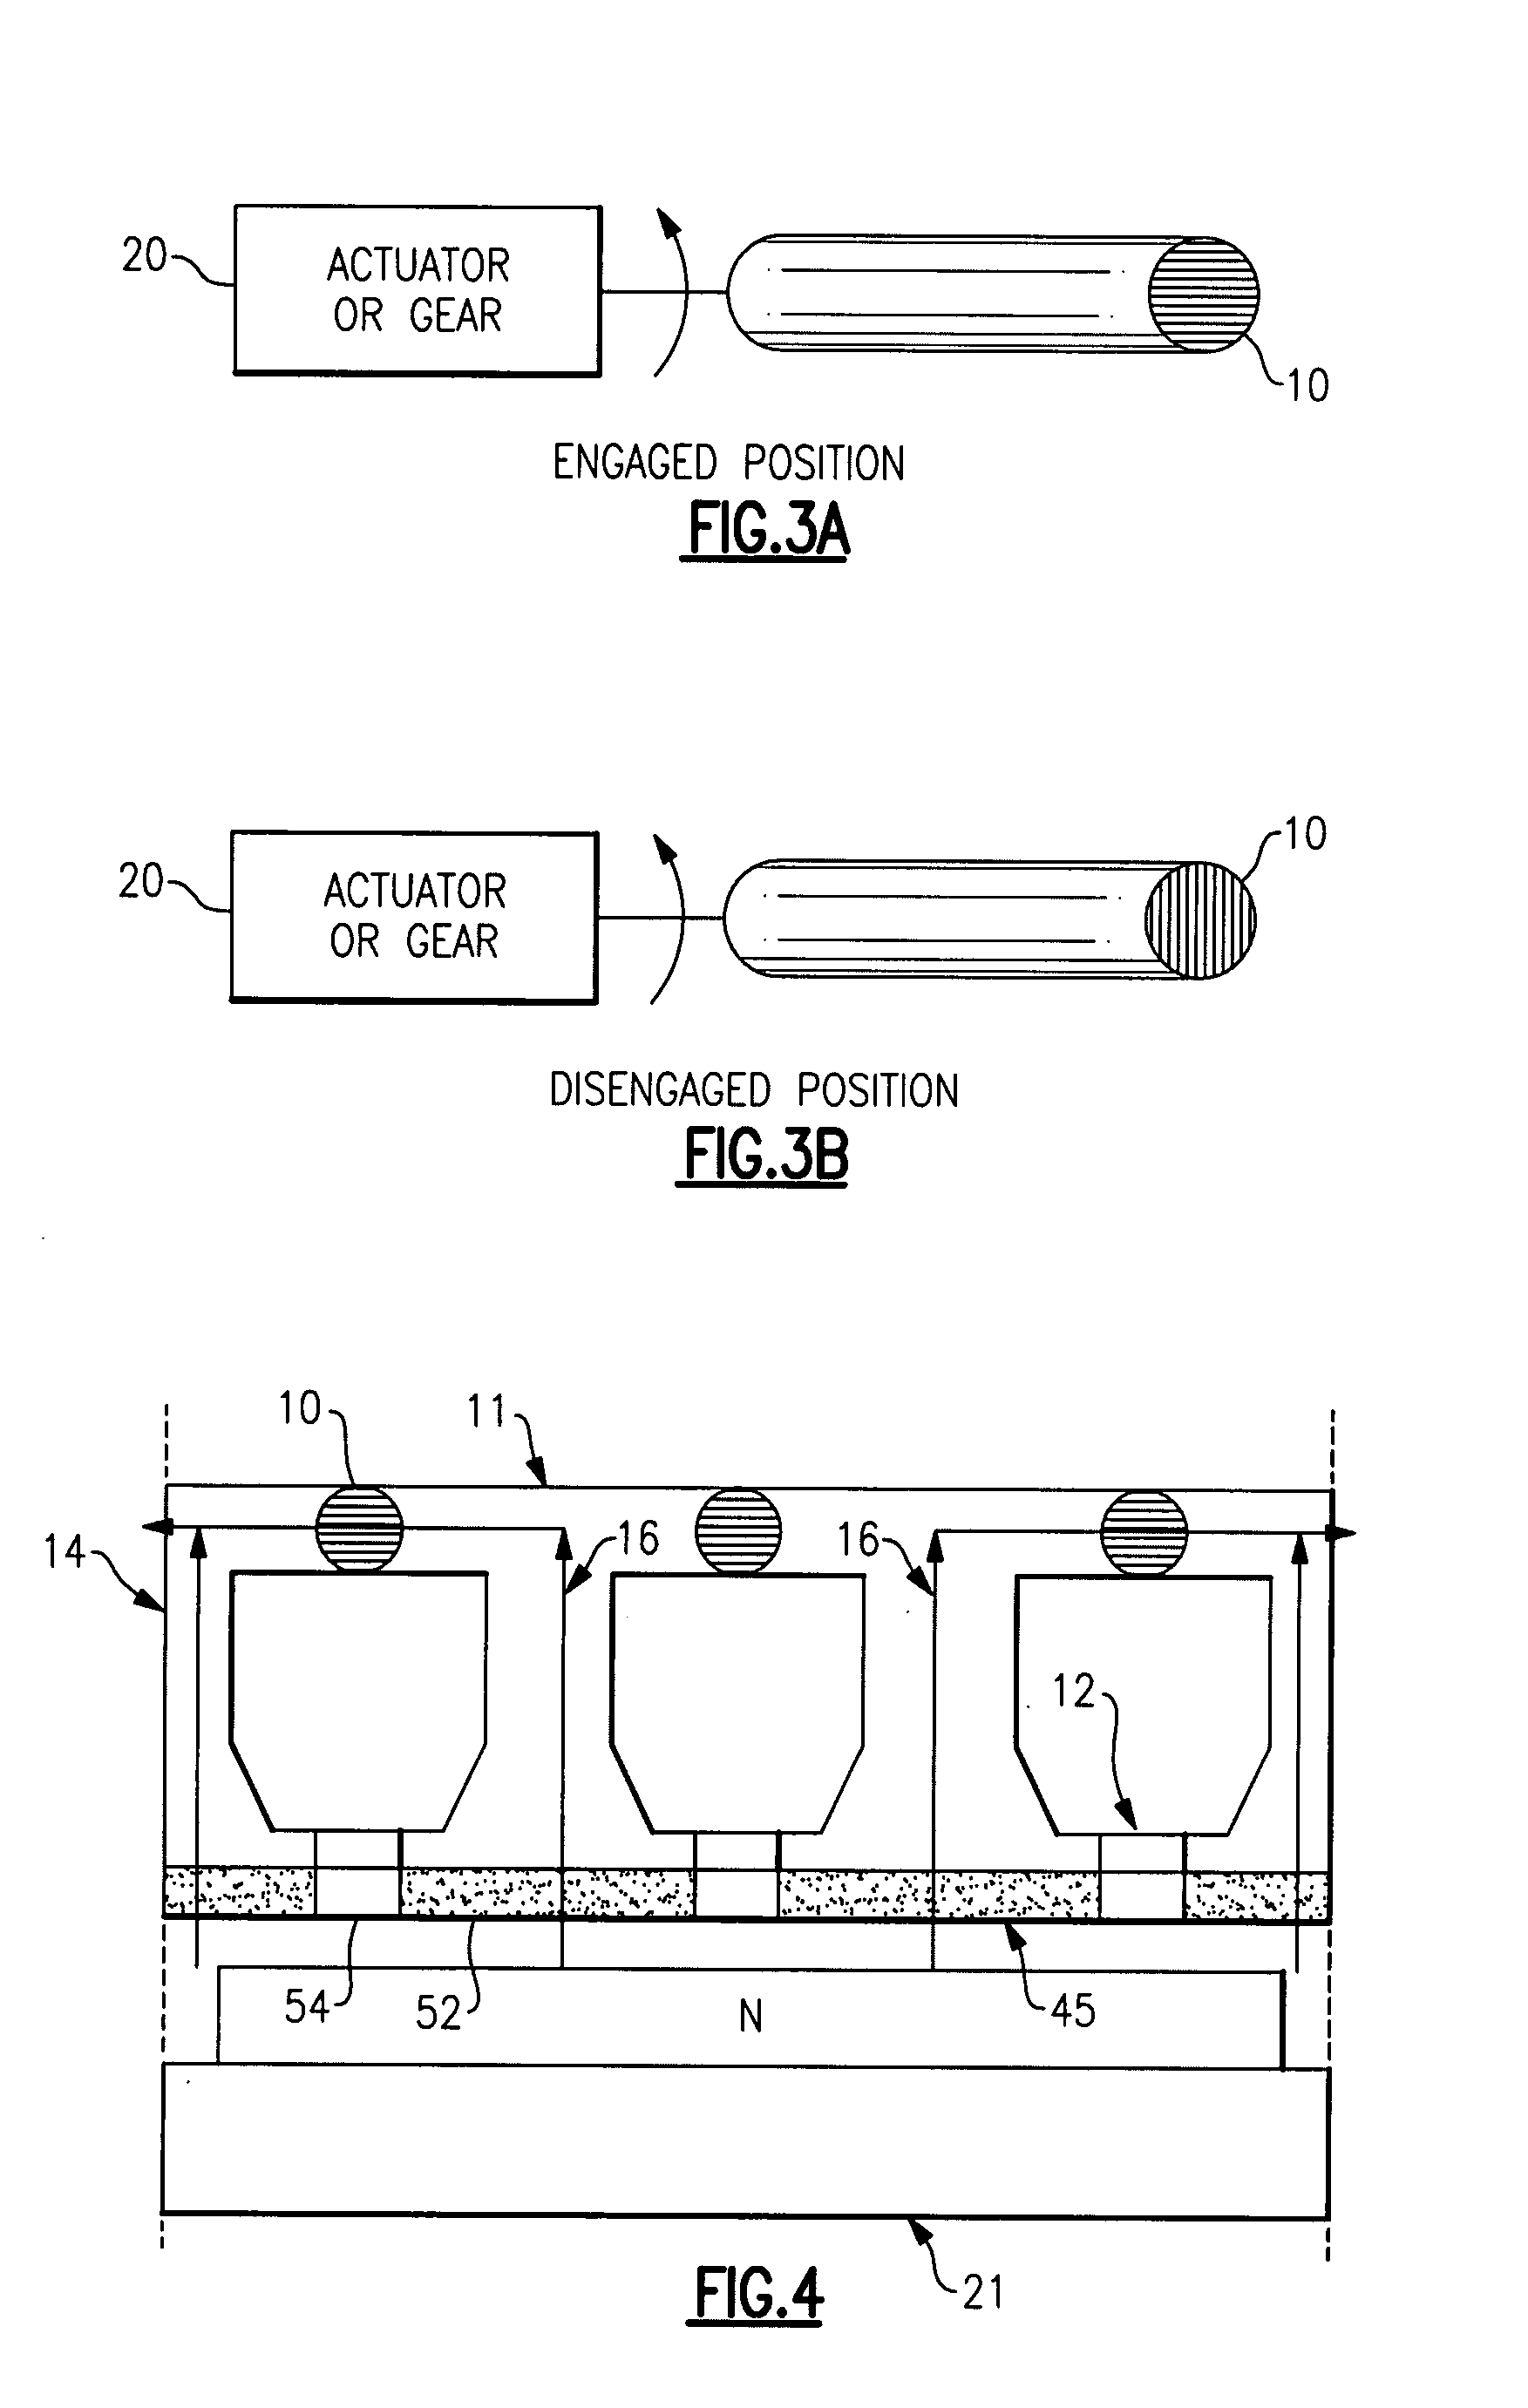 Fault-tolerant permanent magnet machine with reconfigurable stator core slot opening and back iron flux paths